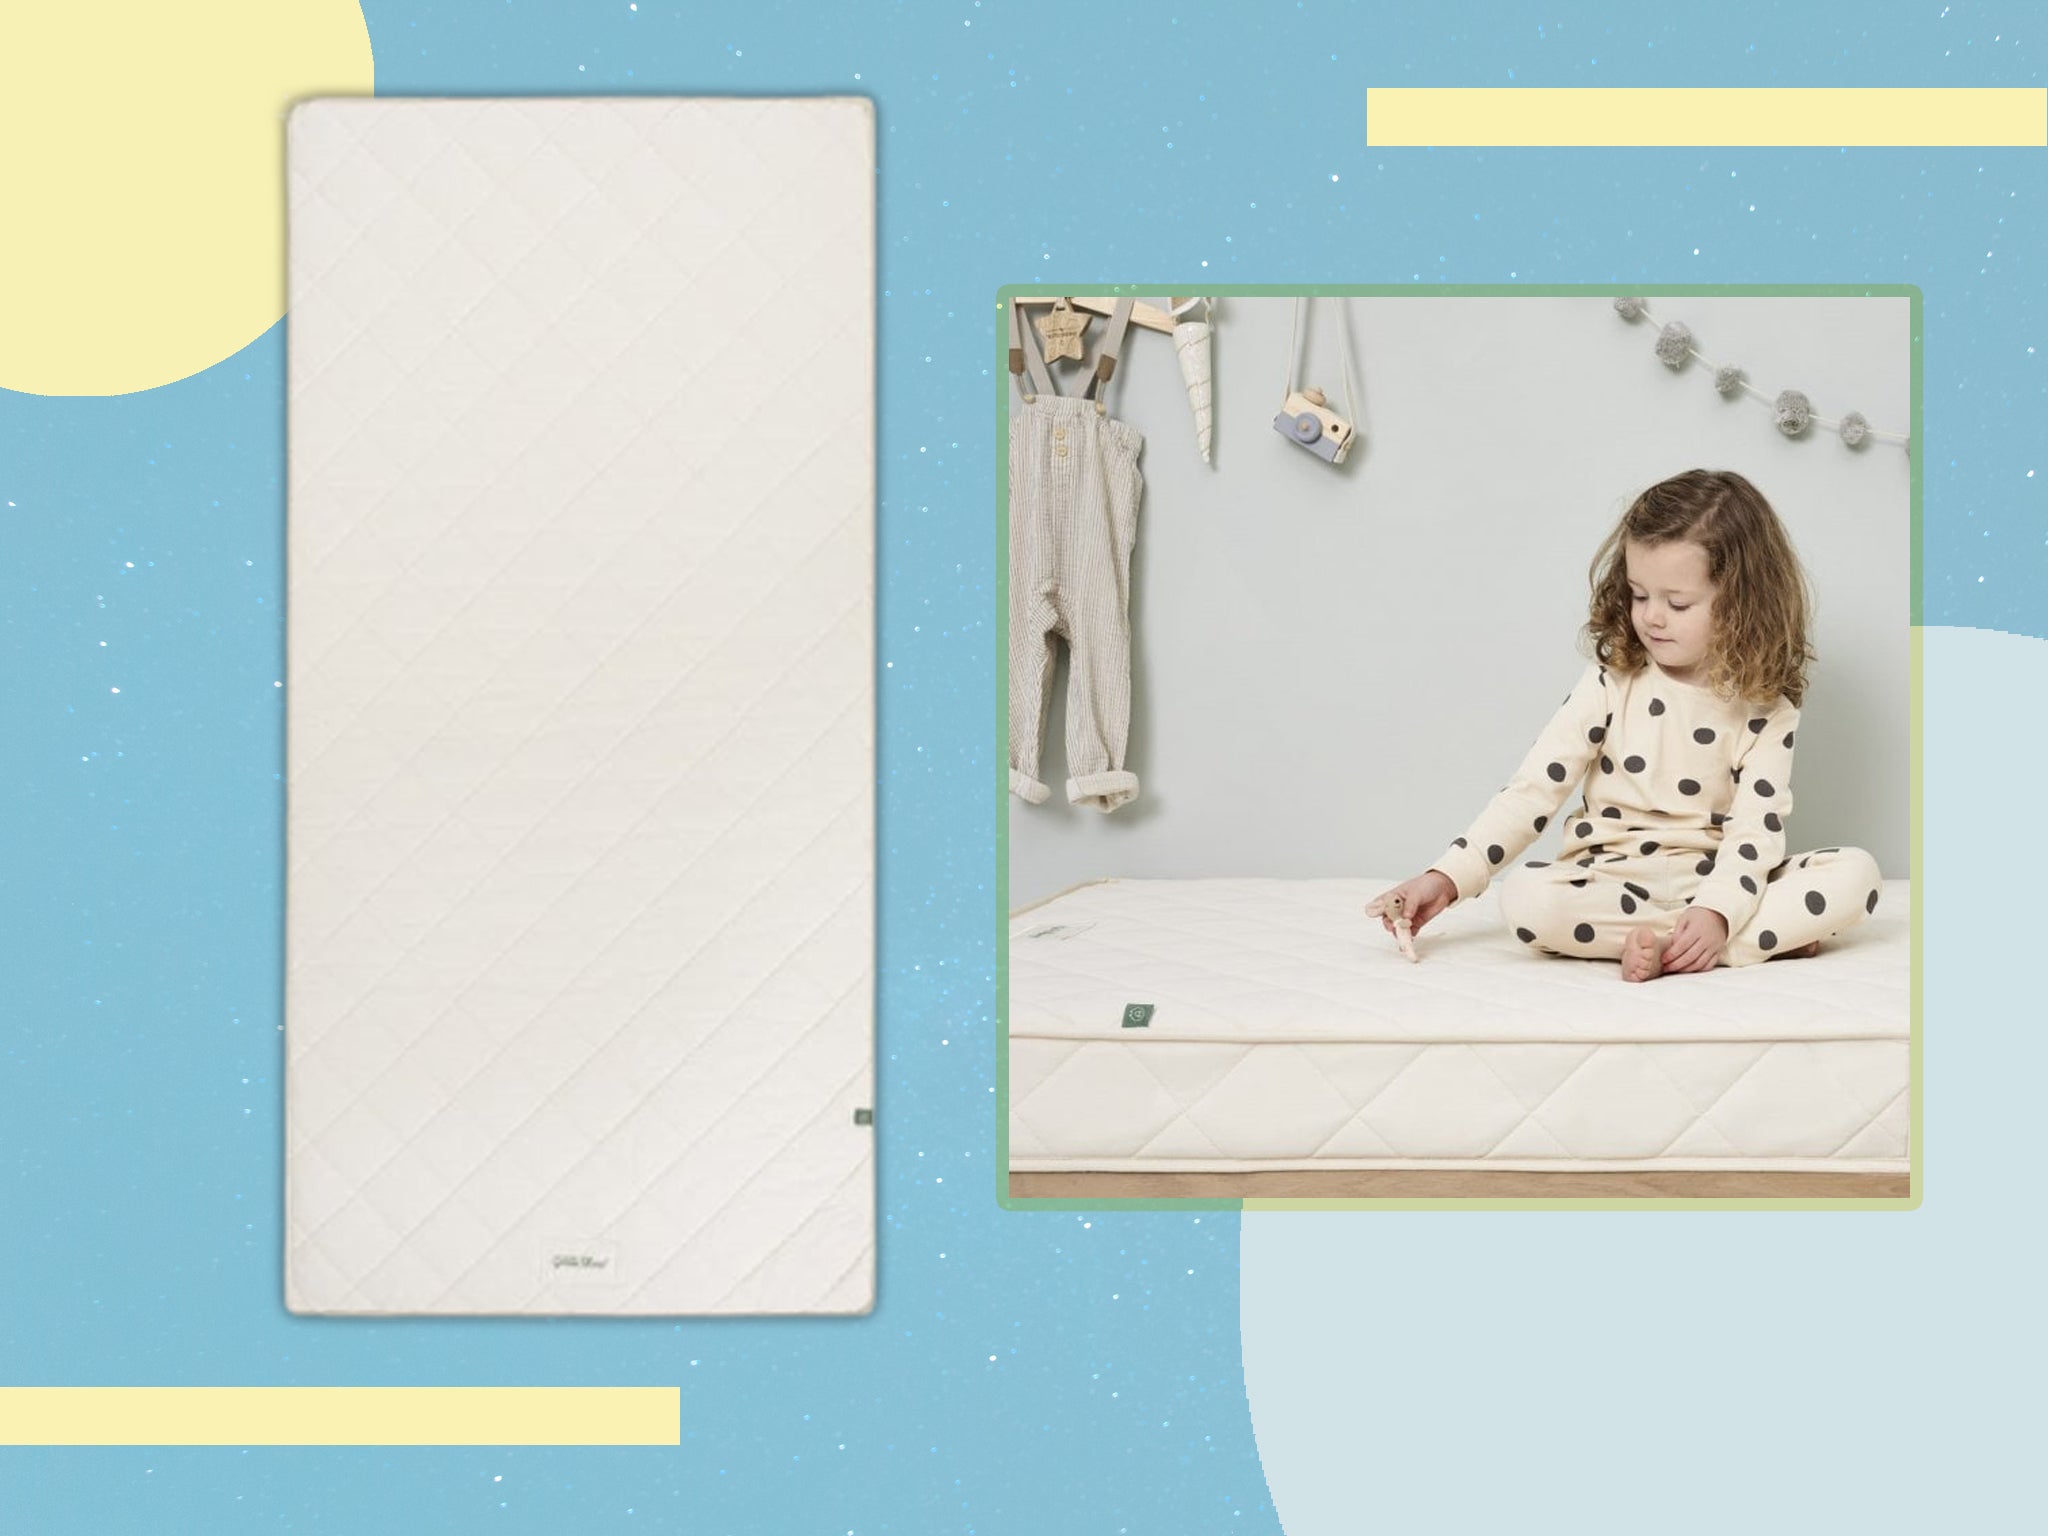 Four natural ingredients make up the mattress; wool, coconut fibre, natural latex and cotton